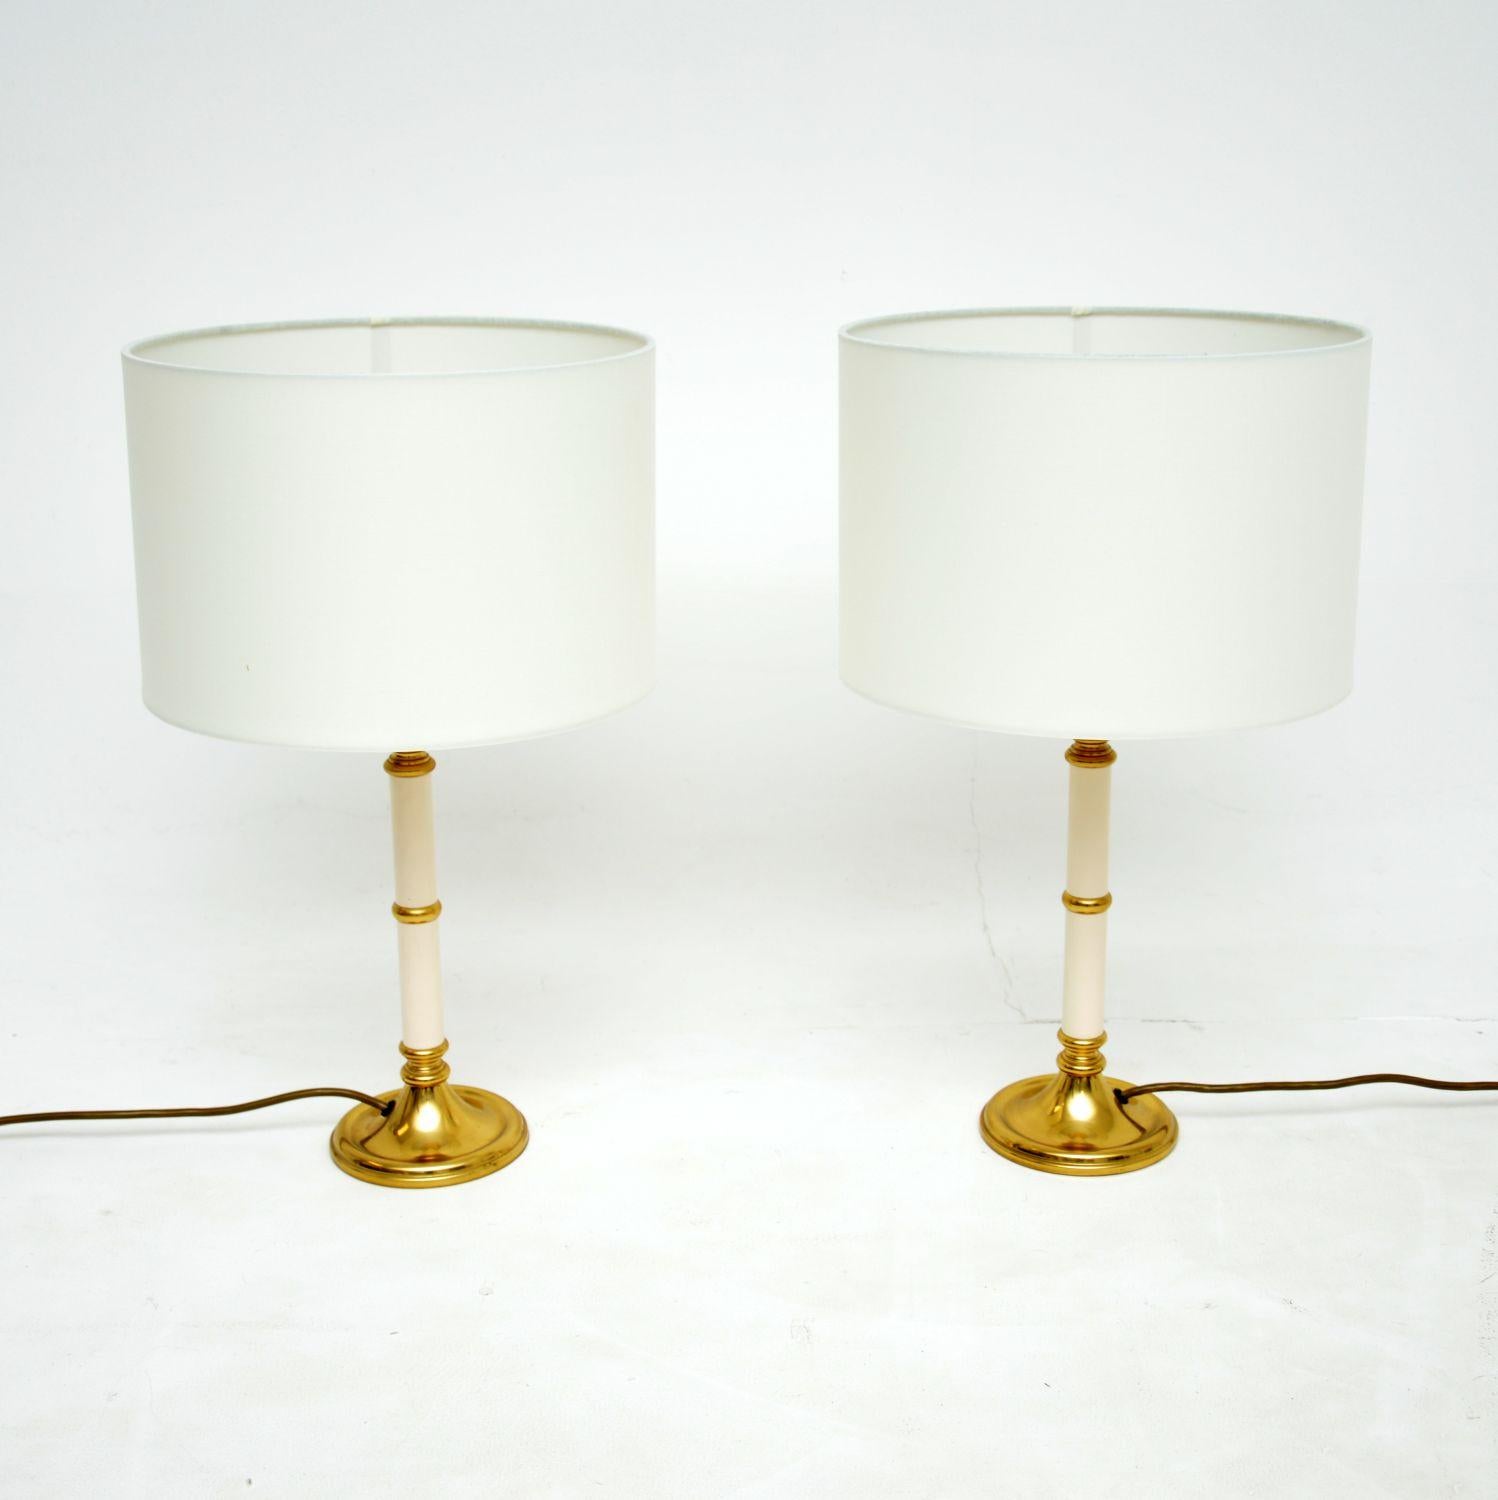 A beautiful pair of solid brass and tole metal table lamps in the antique Victorian style. These were made in England, they date from around the 1970’s.

The quality is superb, these are very well made and are a lovely size.

The condition is